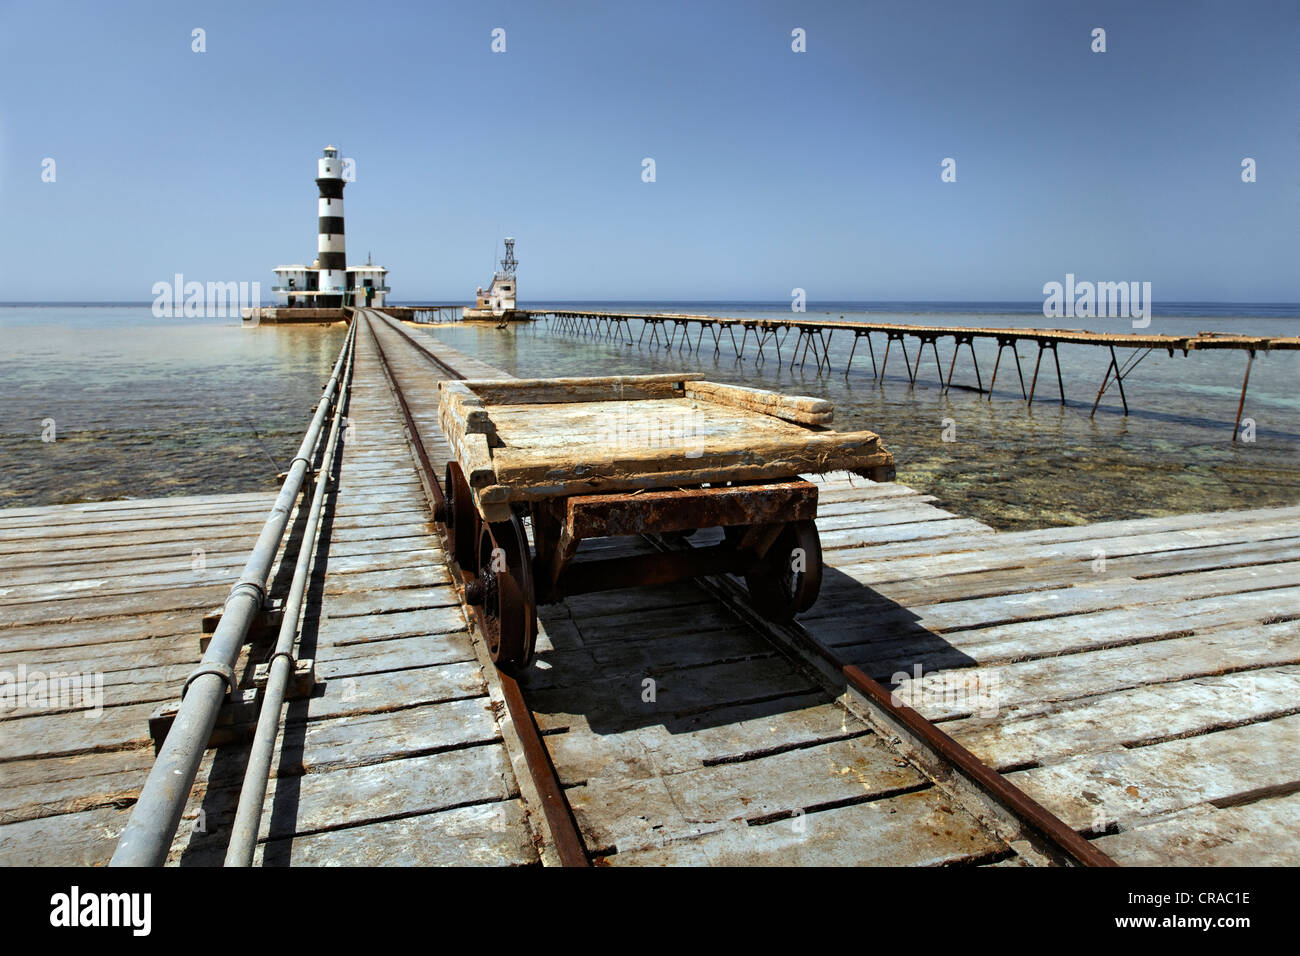 Trolley, rail car and rails, lighthouse with adjoining building, jetty and reef top, Daedalus Reef, Egypt, Red Sea, Africa Stock Photo